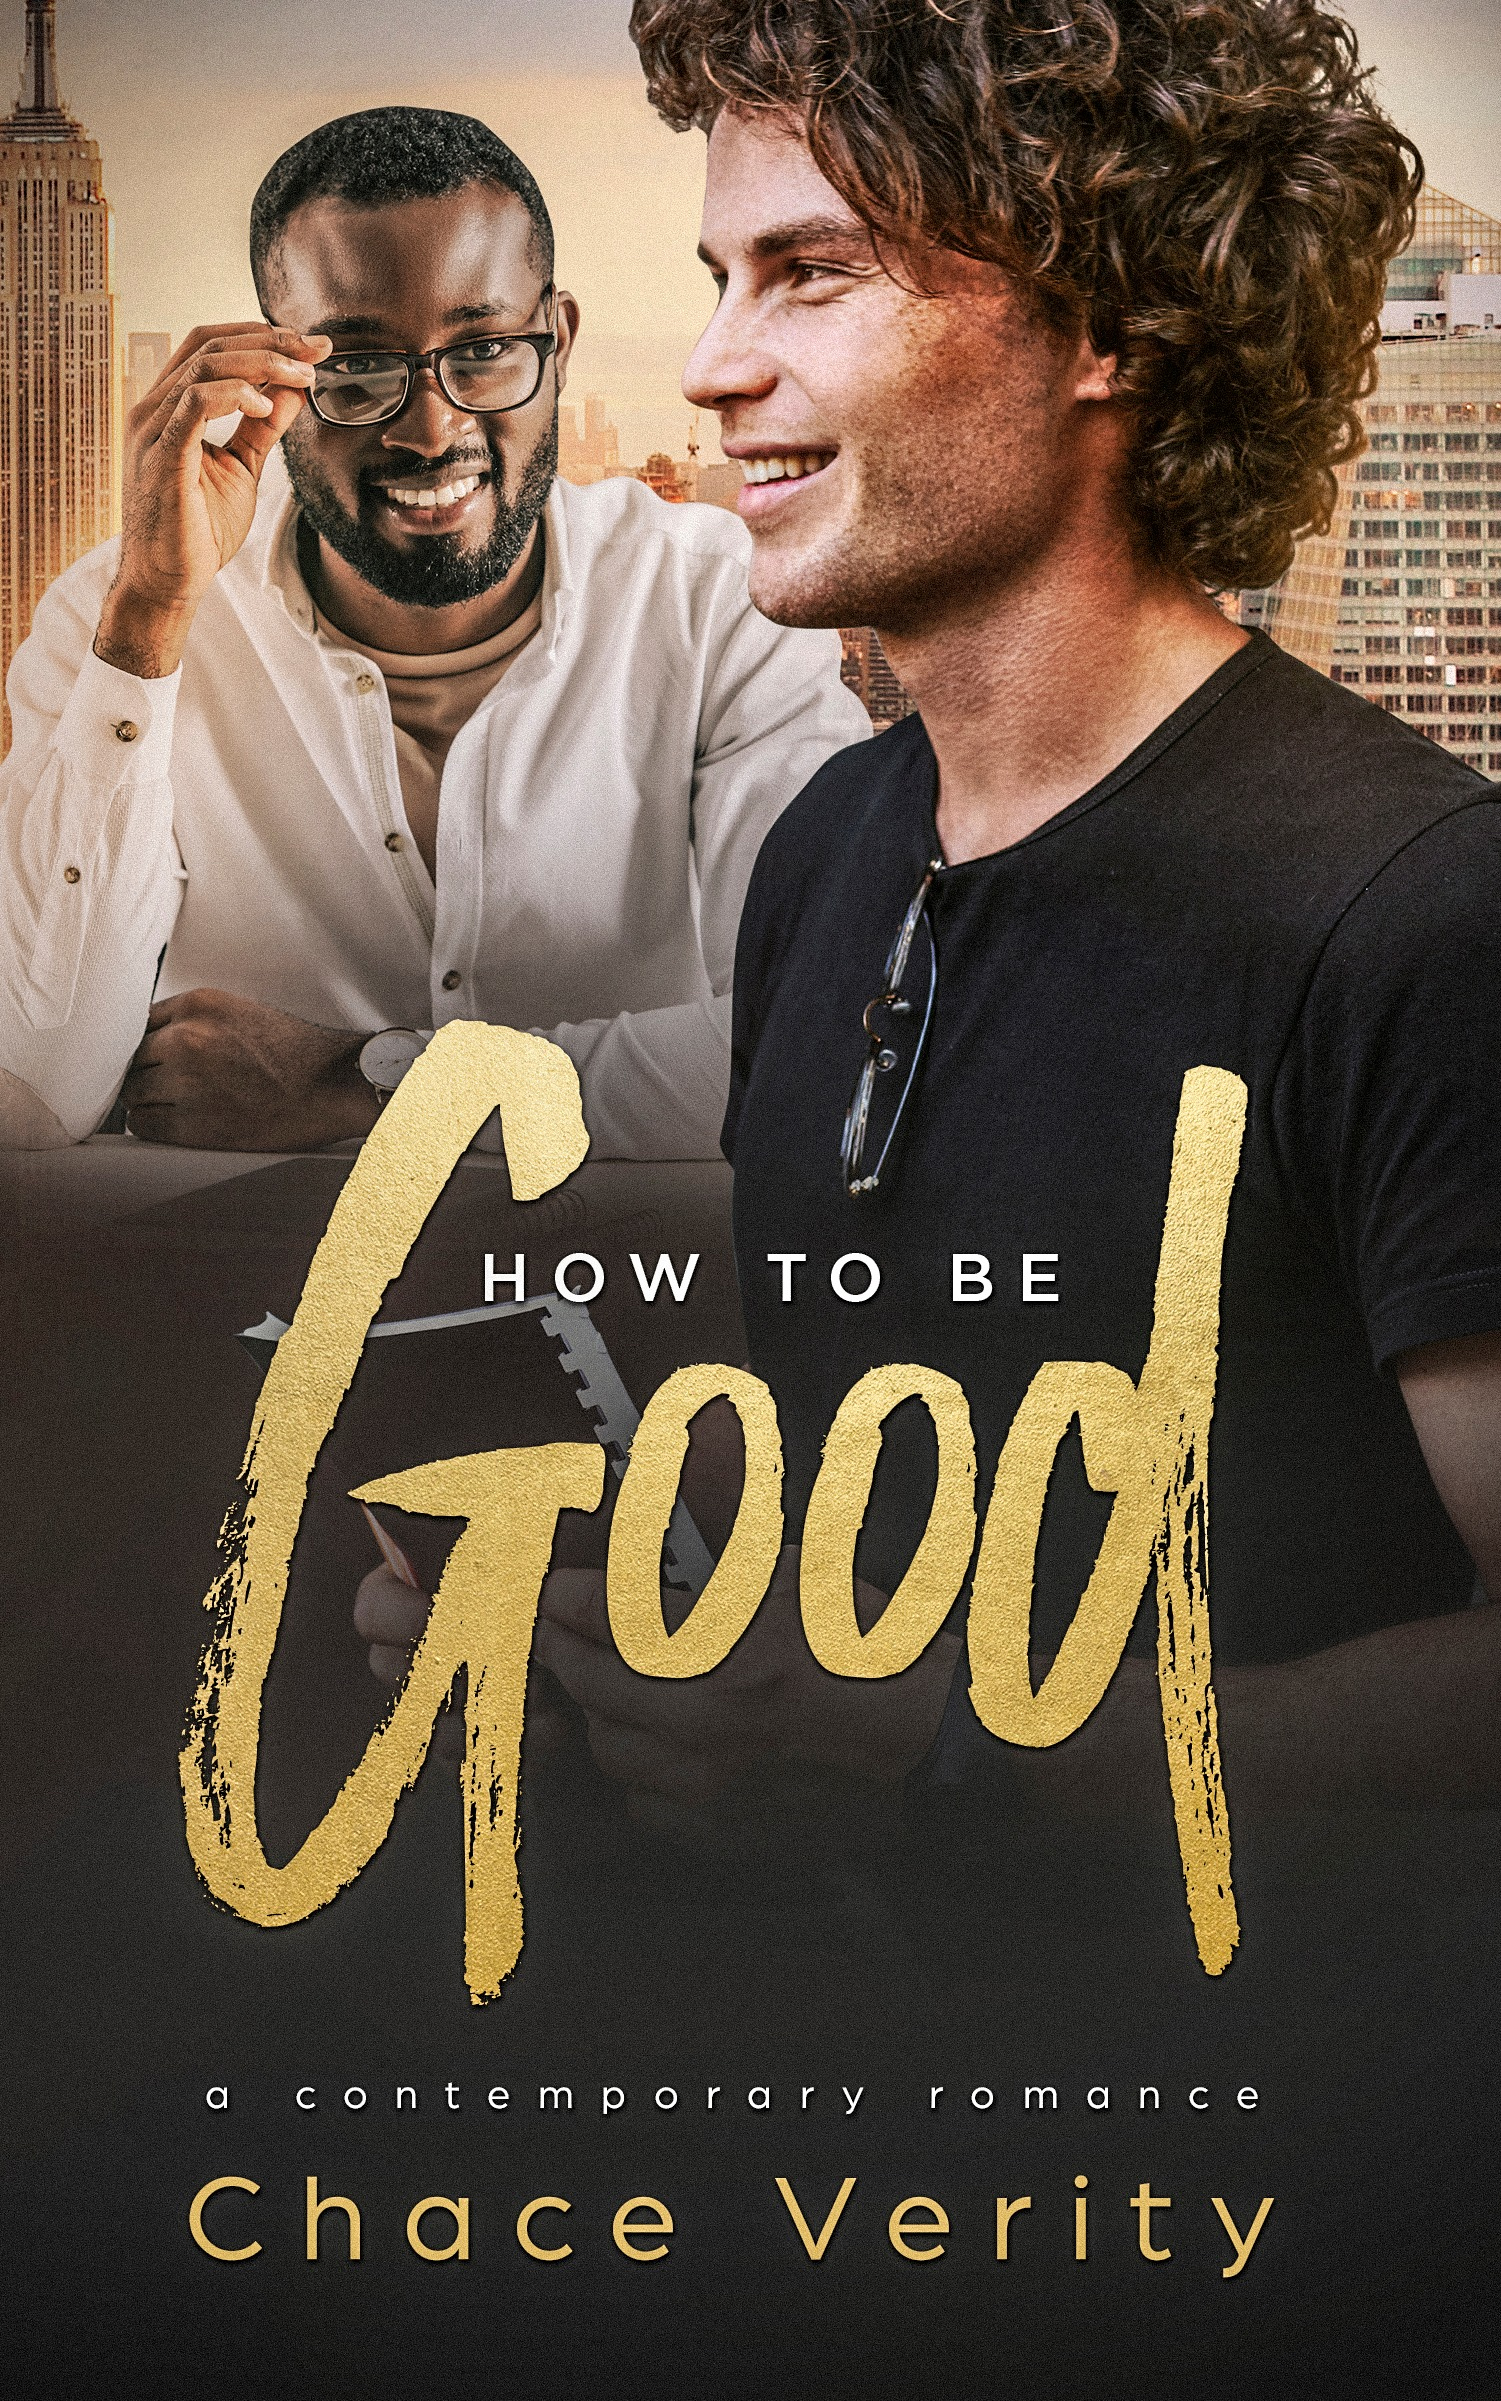 cover for How to Be Good by Chace Verity featuring a white man in a black shirt smiling and a Black man in a white shirt smiling at the first man.